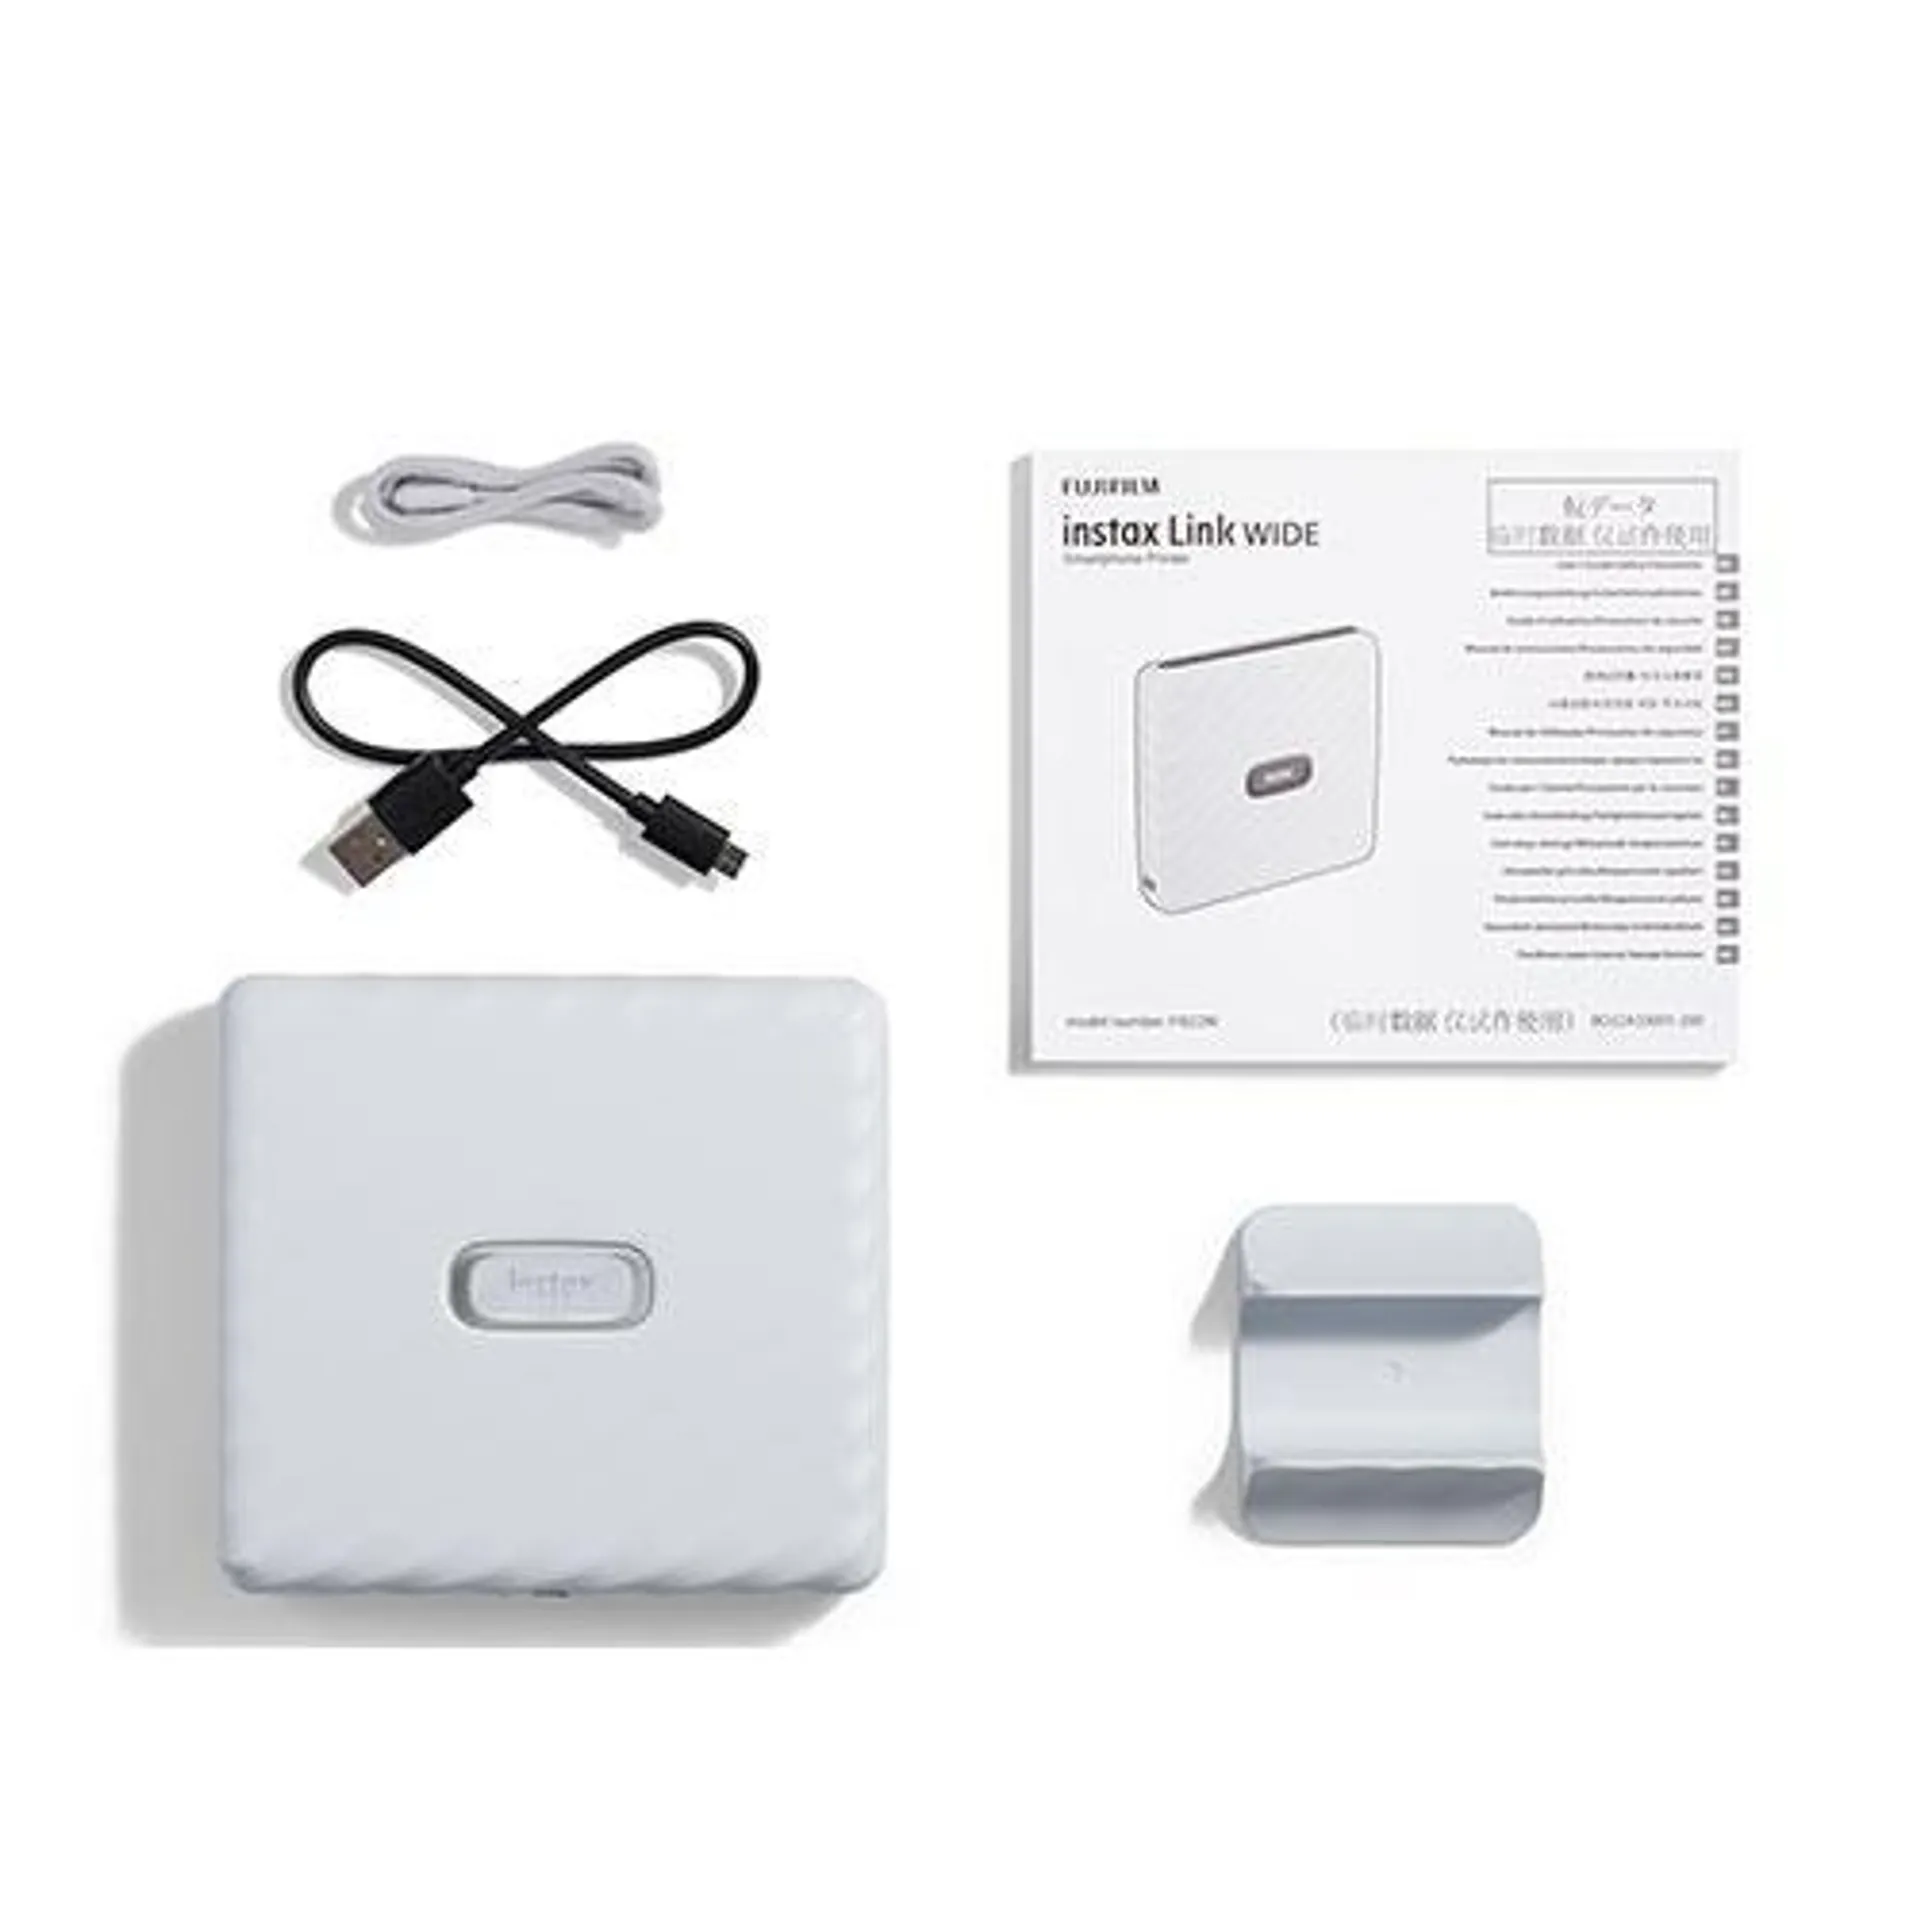 instax Link Wide Printer in Ash White